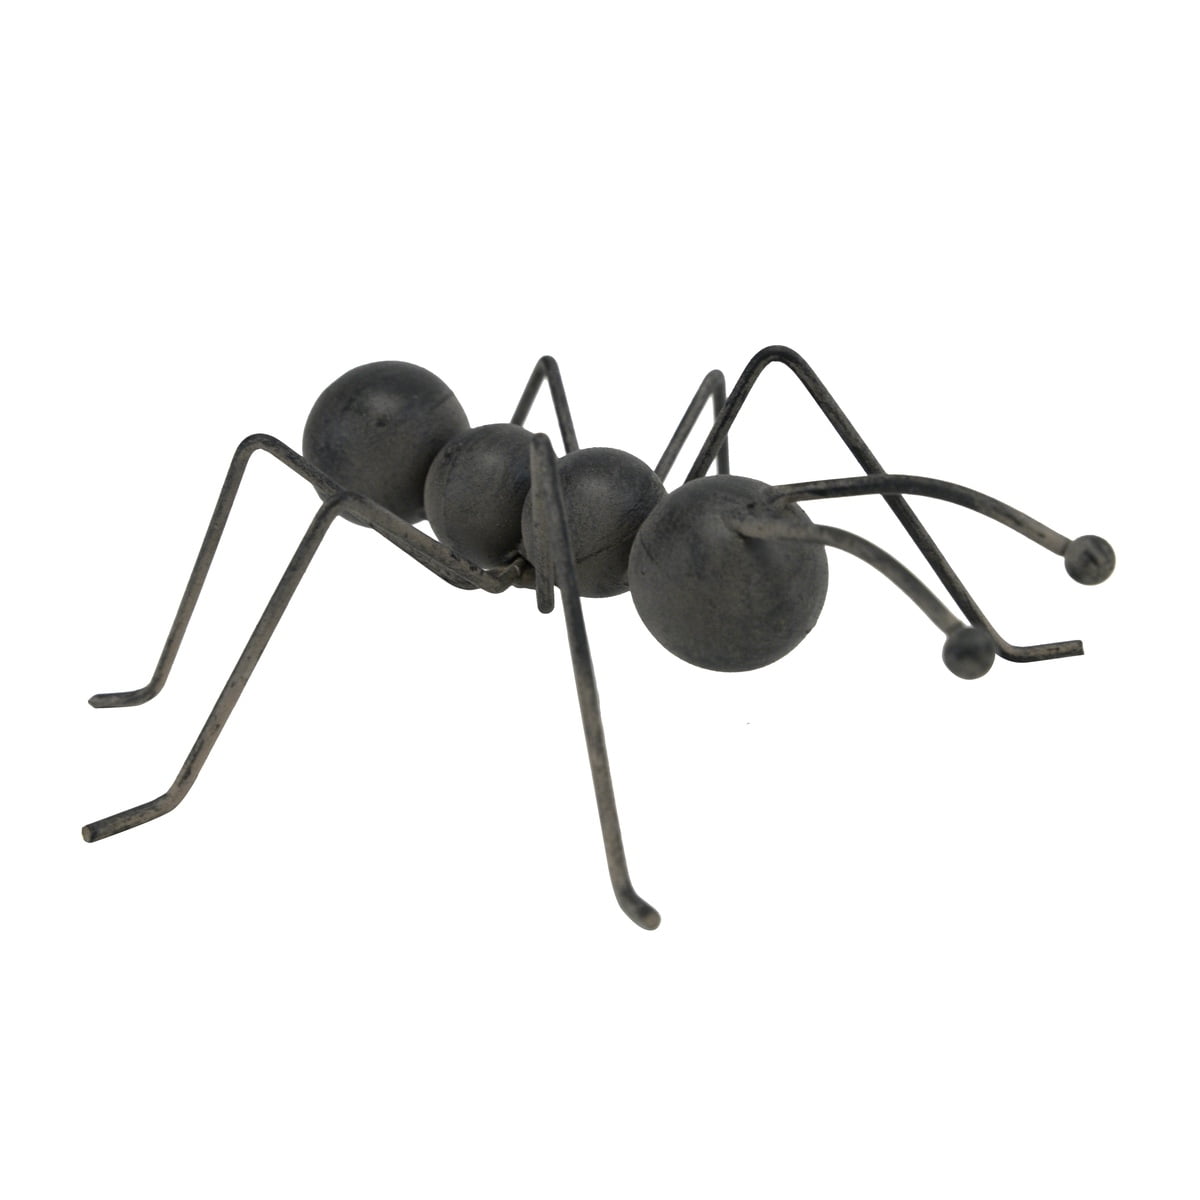 Metal Black Ant Figurine Outdoor Insect Statue Garden Lawn Yard Art Home Decor 